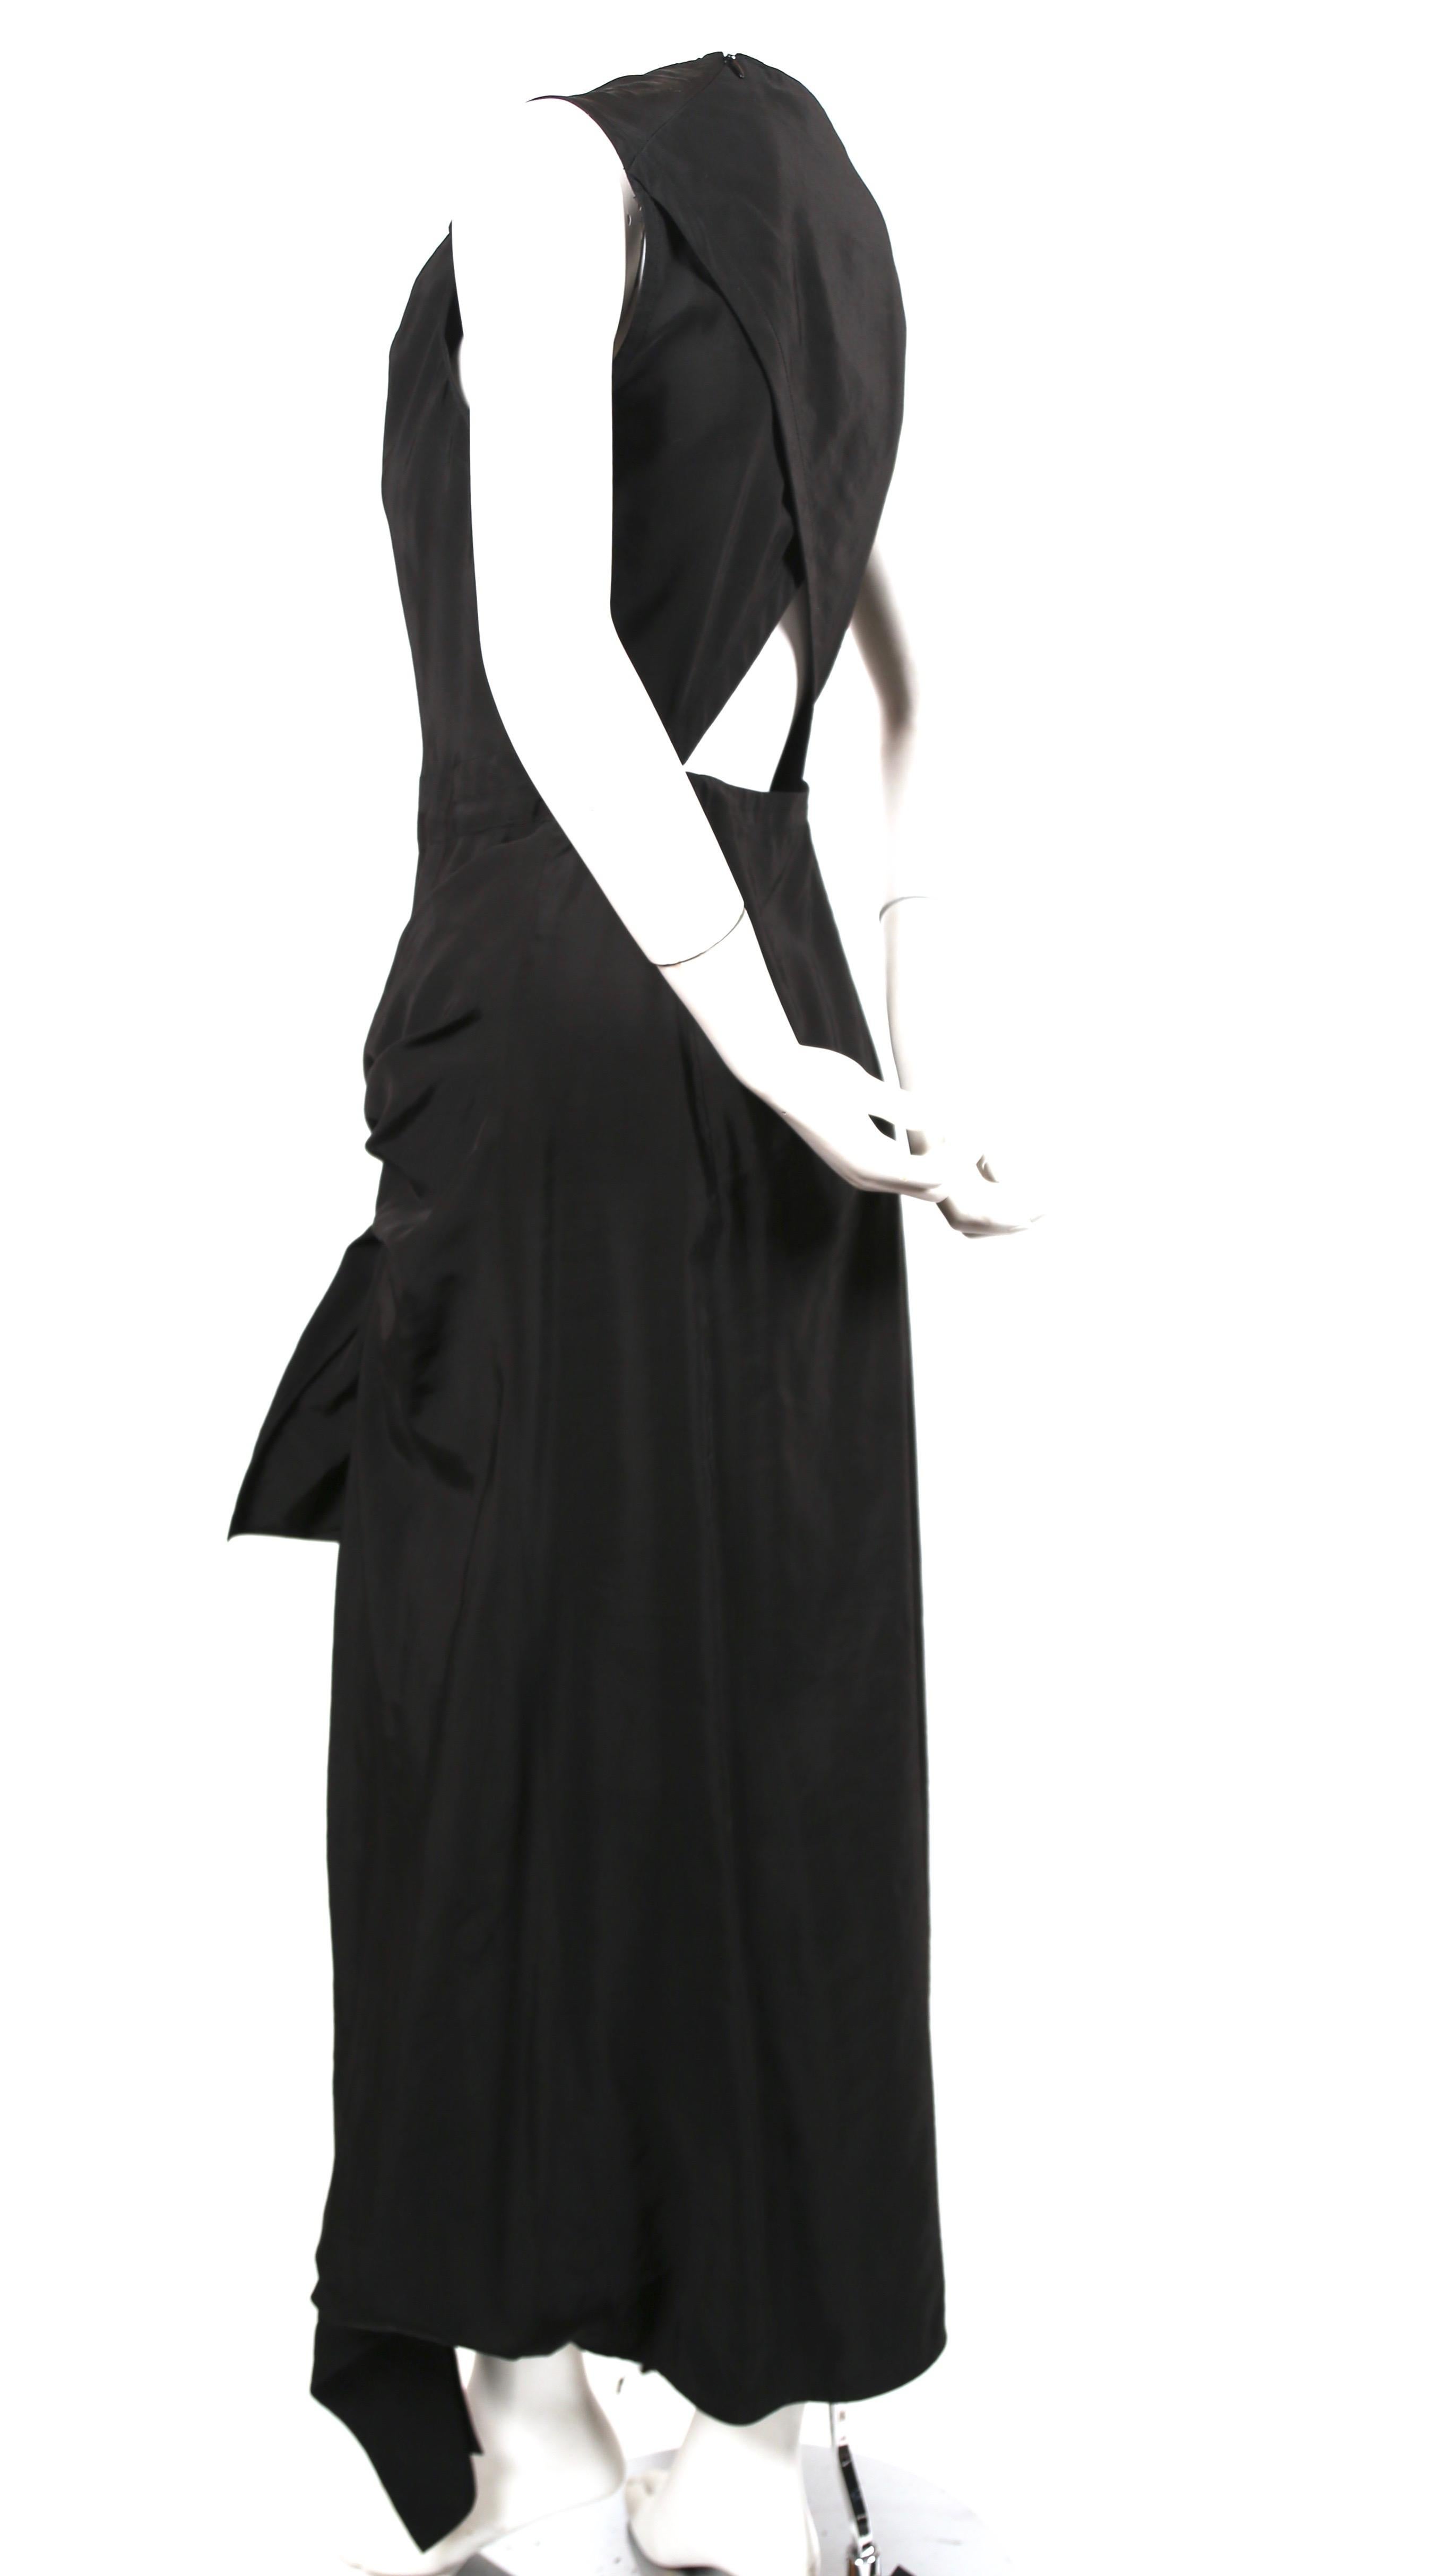 Women's new CELINE By PHOEBE PHILO black dress with ties and cut out back For Sale